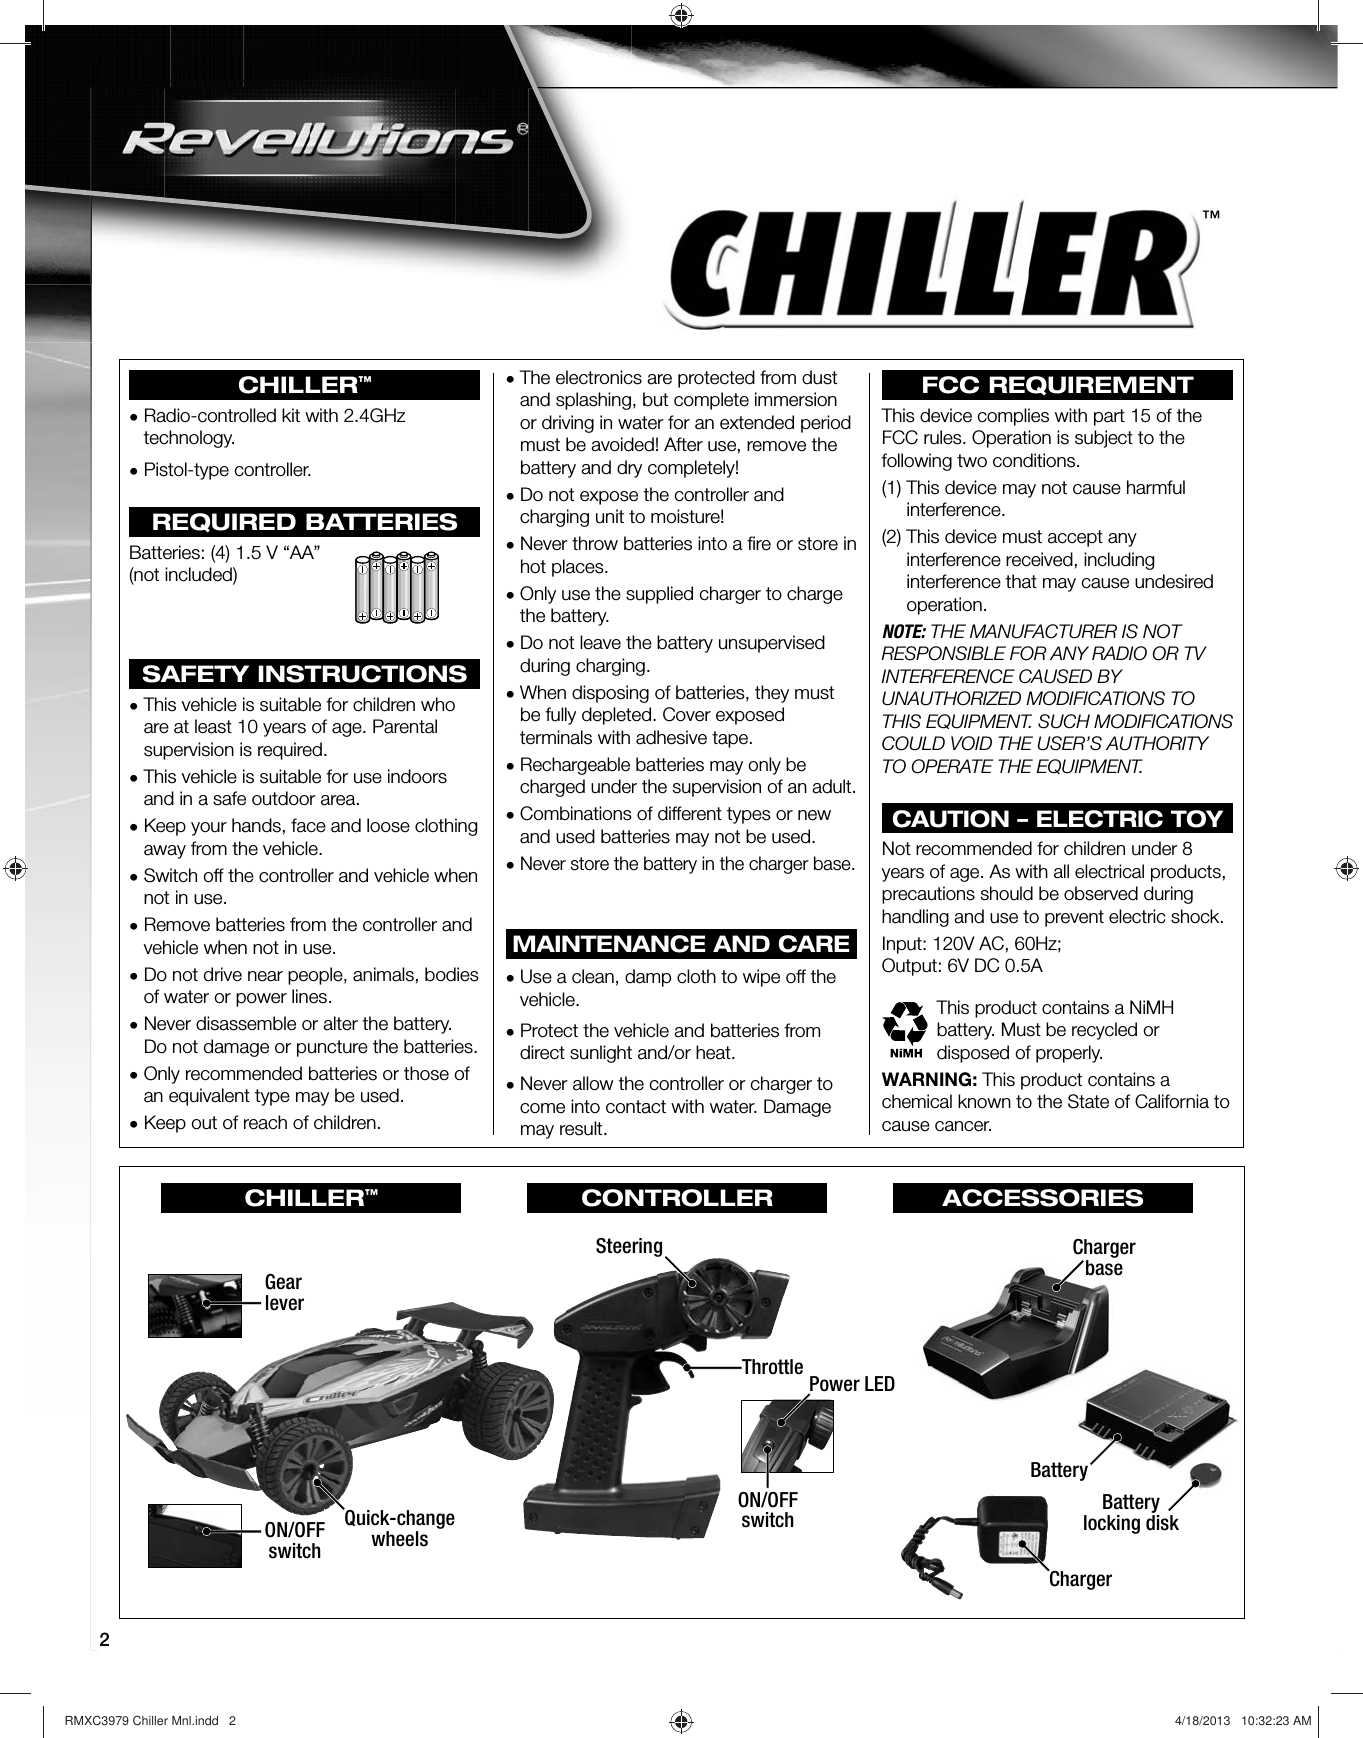 2™CHILLER™•  Radio-controlled kit with 2.4GHz technology.•  Pistol-type controller.REQUIRED BATTERIESBatteries: (4) 1.5 V “AA” (not included)SAFETY INSTRUCTIONS•  This vehicle is suitable for children who are at least 10 years of age. Parental supervision is required.•  This vehicle is suitable for use indoors and in a safe outdoor area.•  Keep your hands, face and loose clothing away from the vehicle.•  Switch off the controller and vehicle when not in use.•  Remove batteries from the controller and vehicle when not in use.•  Do not drive near people, animals, bodies of water or power lines.•  Never disassemble or alter the battery. Do not damage or puncture the batteries.•  Only recommended batteries or those of an equivalent type may be used.•  Keep out of reach of children.•  The electronics are protected from dust and splashing, but complete immersion or driving in water for an extended period must be avoided! After use, remove the battery and dry completely!•  Do not expose the controller and charging unit to moisture!•  Never throw batteries into a ﬁ re or store in hot places.•  Only use the supplied charger to charge the battery.•  Do not leave the battery unsupervised during charging.•  When disposing of batteries, they must be fully depleted. Cover exposed terminals with adhesive tape.•  Rechargeable batteries may only be charged under the supervision of an adult.•  Combinations of different types or new and used batteries may not be used.•  Never store the battery in the charger base.MAINTENANCE AND CARE•  Use a clean, damp cloth to wipe off the vehicle.•  Protect the vehicle and batteries from direct sunlight and/or heat.•  Never allow the controller or charger to come into contact with water. Damage may result.FCC REQUIREMENTThis device complies with part 15 of the FCC rules. Operation is subject to the following two conditions.(1)  This device may not cause harmful interference.(2)  This device must accept any interference received, including interference that may cause undesired operation.NOTE: THE MANUFACTURER IS NOT RESPONSIBLE FOR ANY RADIO OR TV INTERFERENCE CAUSED BY UNAUTHORIZED MODIFICATIONS TO THIS EQUIPMENT. SUCH MODIFICATIONS COULD VOID THE USER’S AUTHORITY TO OPERATE THE EQUIPMENT.CAUTION – ELECTRIC TOYNot recommended for children under 8 years of age. As with all electrical products, precautions should be observed during handling and use to prevent electric shock.Input: 120V AC, 60Hz;Output: 6V DC 0.5AThis product contains a NiMH battery. Must be recycled or disposed of properly.WARNING: This product contains a chemical known to the State of California to cause cancer.ON/OFFswitchGearleverBatteryChargerbaseChargerSteeringThrottle Power LEDON/OFFswitchQuick-changewheelsBatterylocking diskCHILLER™CONTROLLER ACCESSORIESRMXC3979 Chiller Mnl.indd   2 4/18/2013   10:32:23 AM